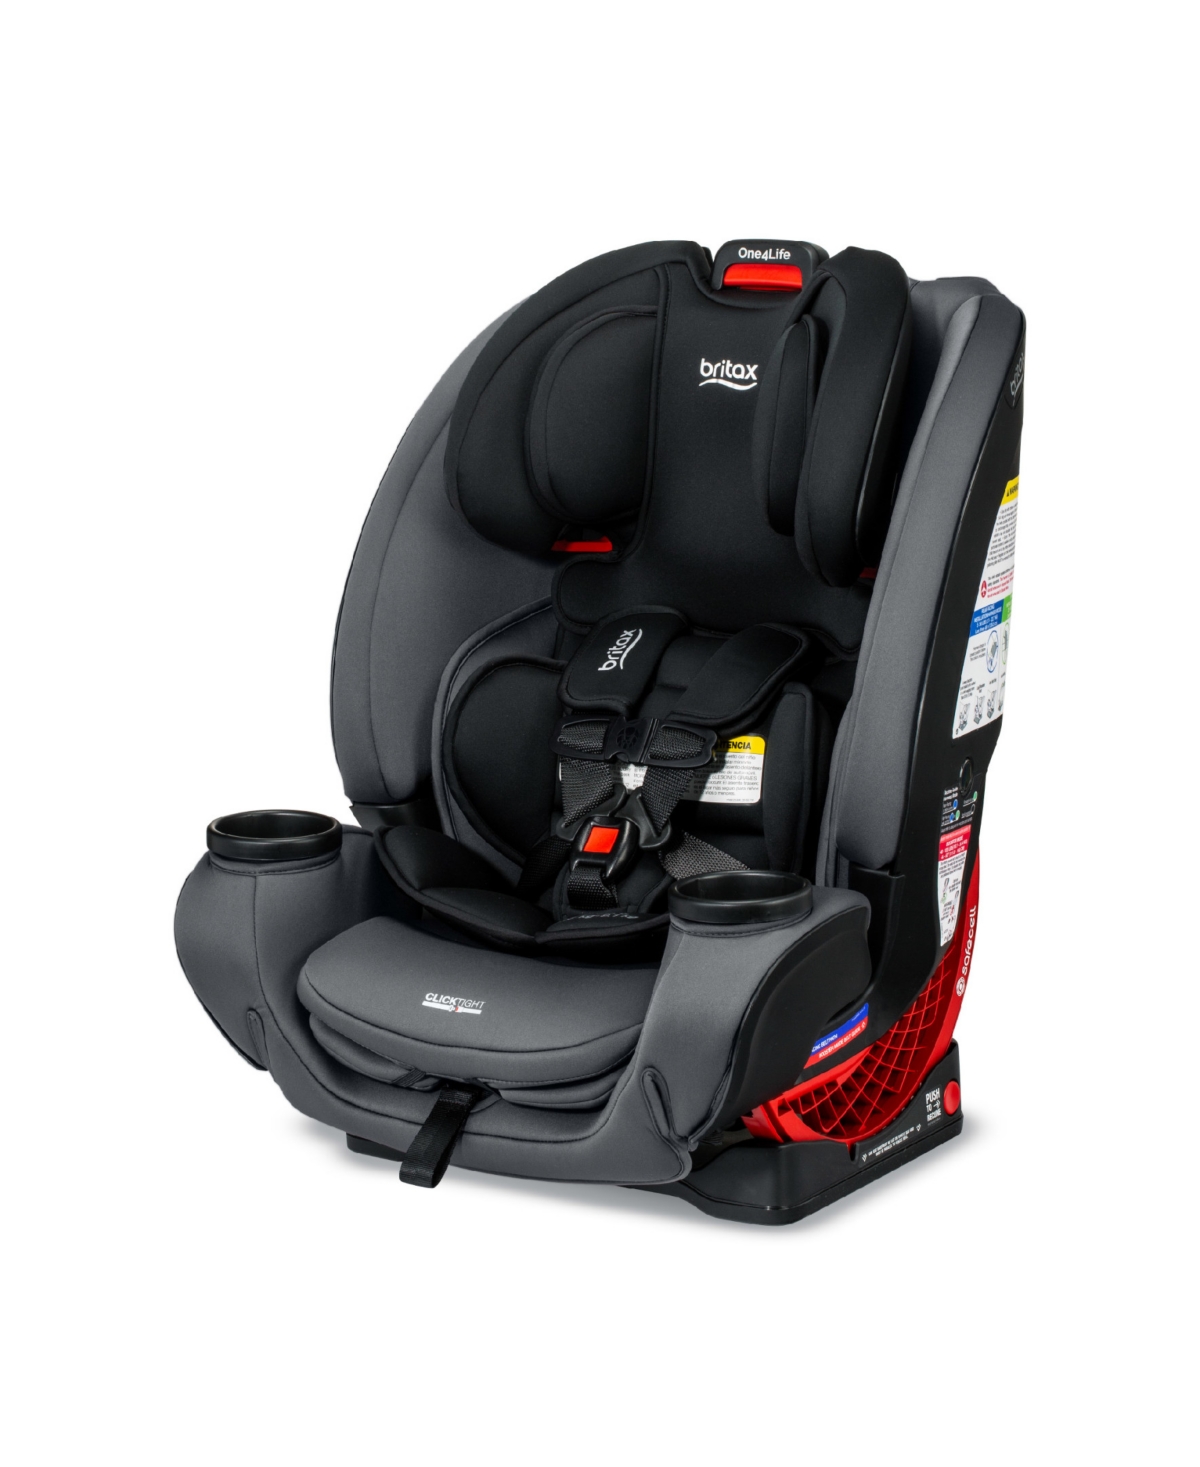 Britax One4life All-in-one Car Seat In Onyx Stone